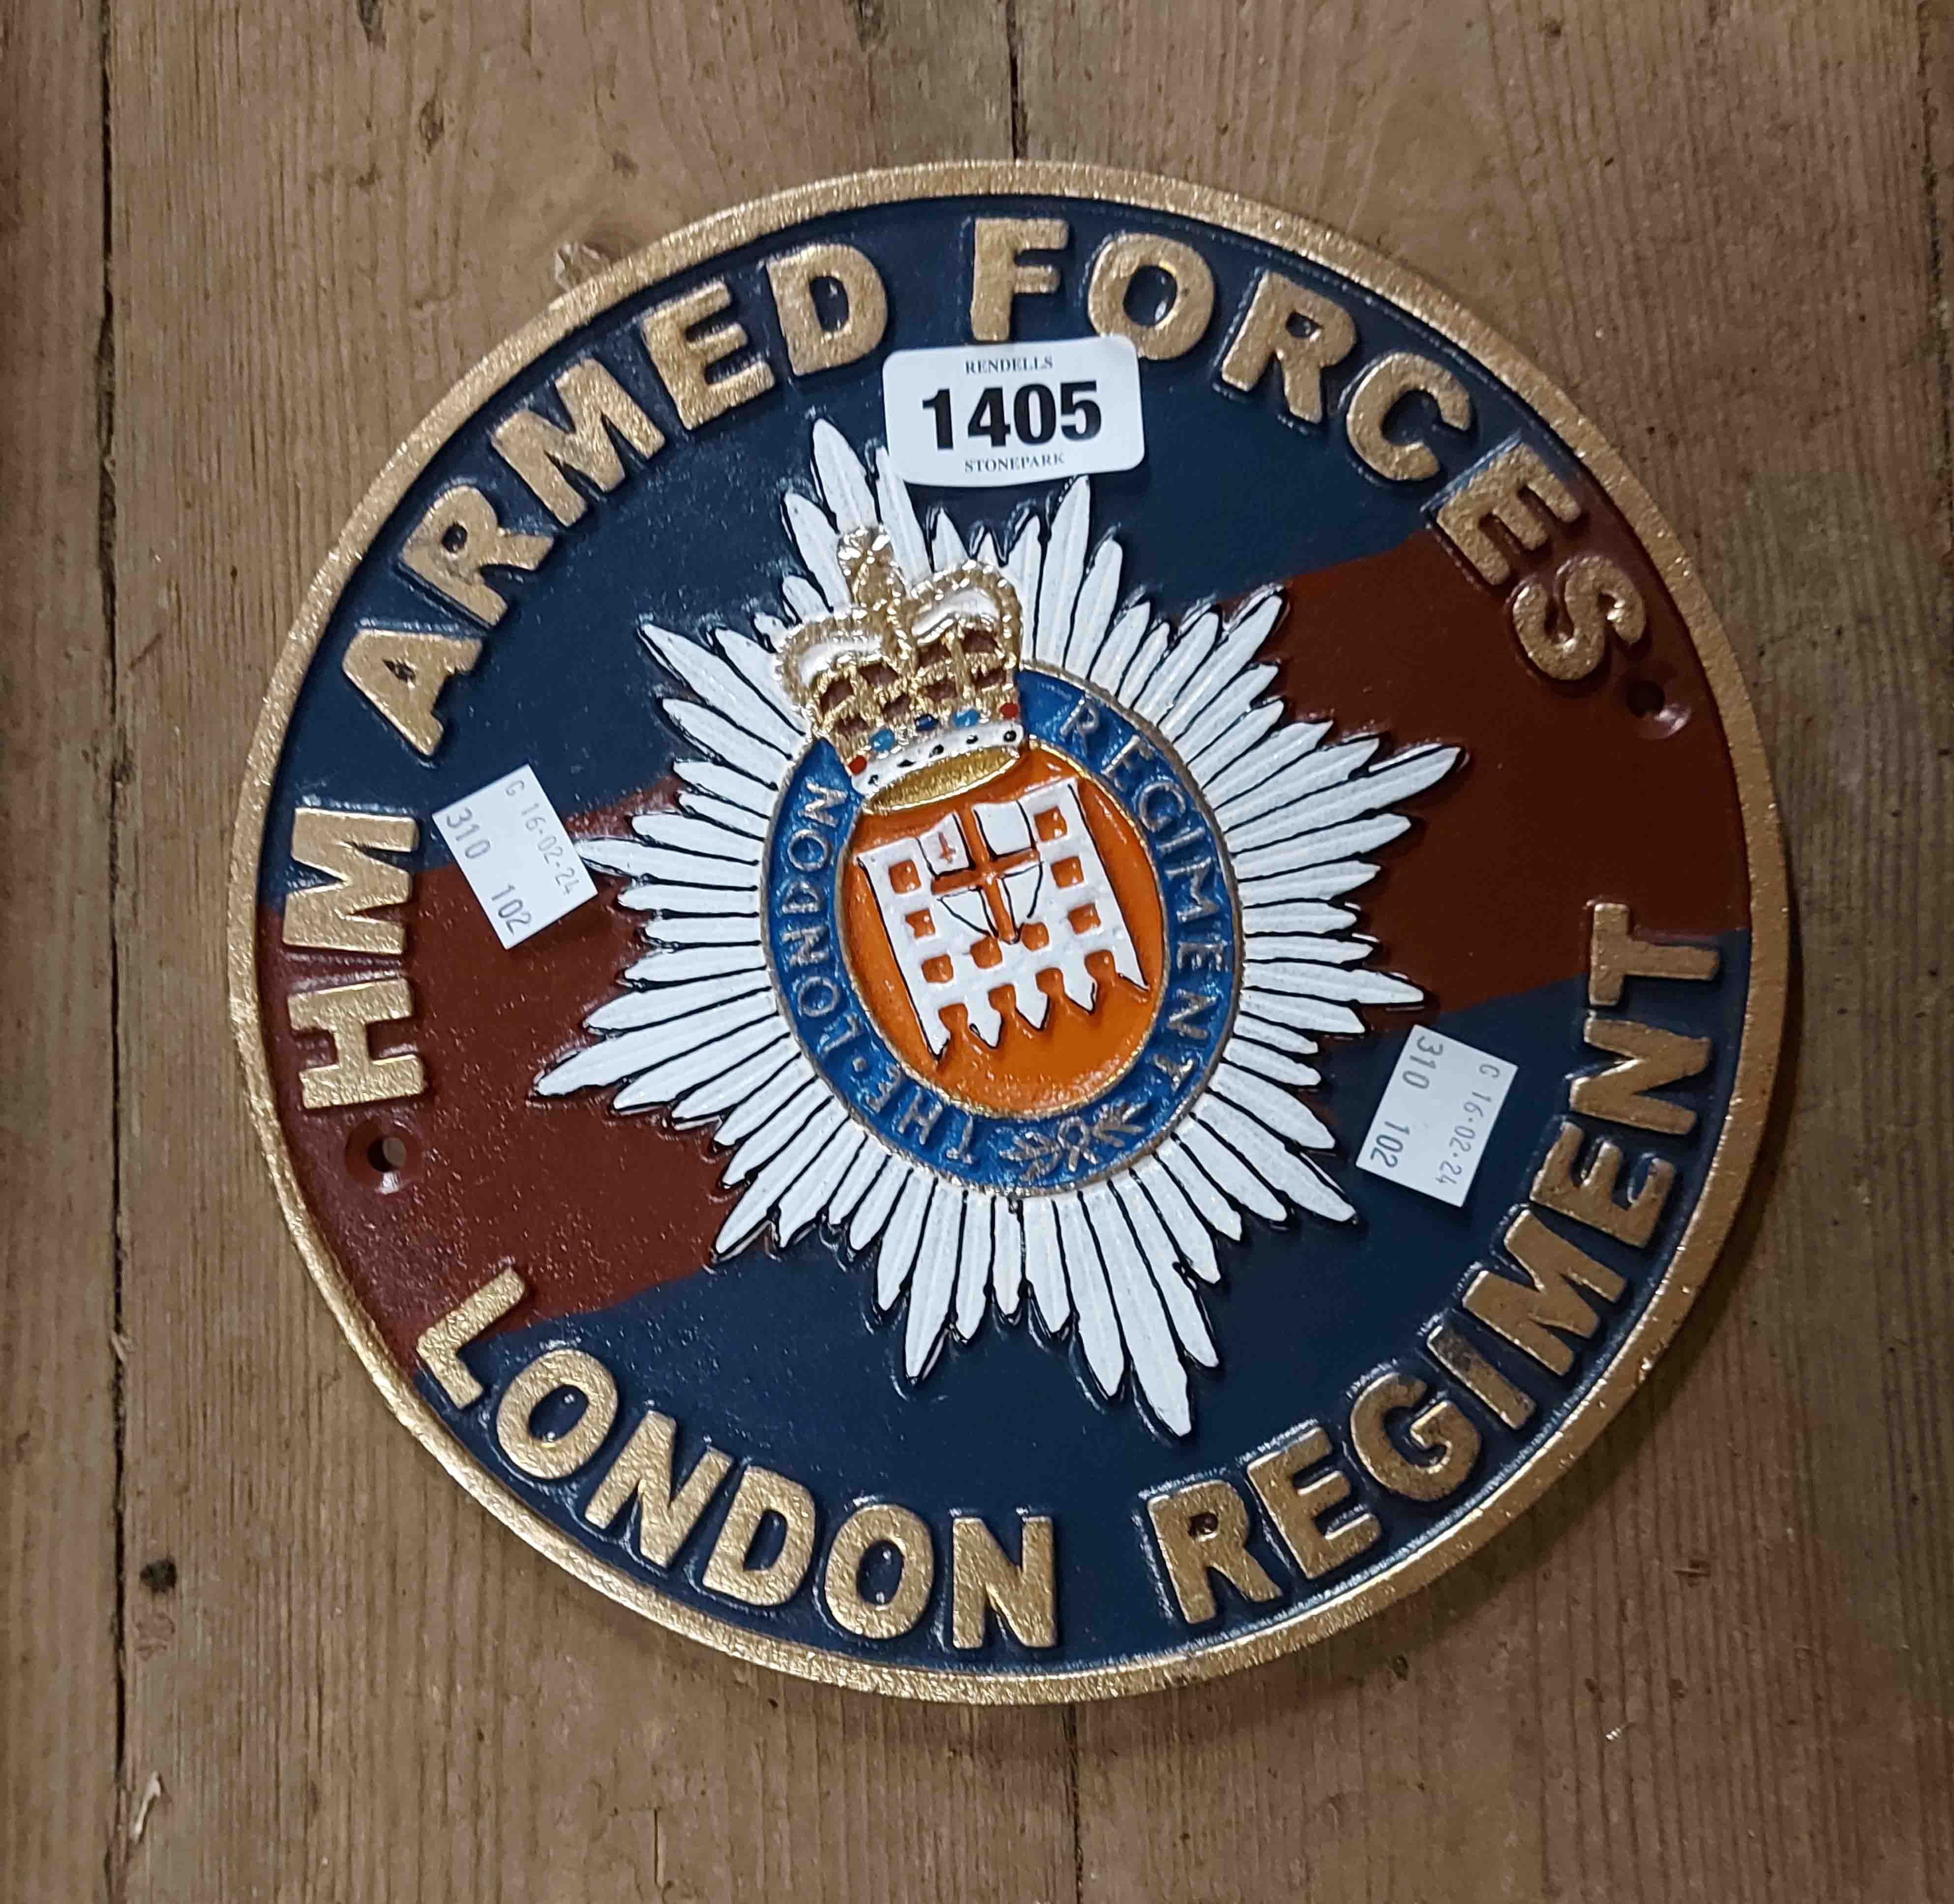 A modern 'HM Armed Forces London Regiment' painted cast iron sign